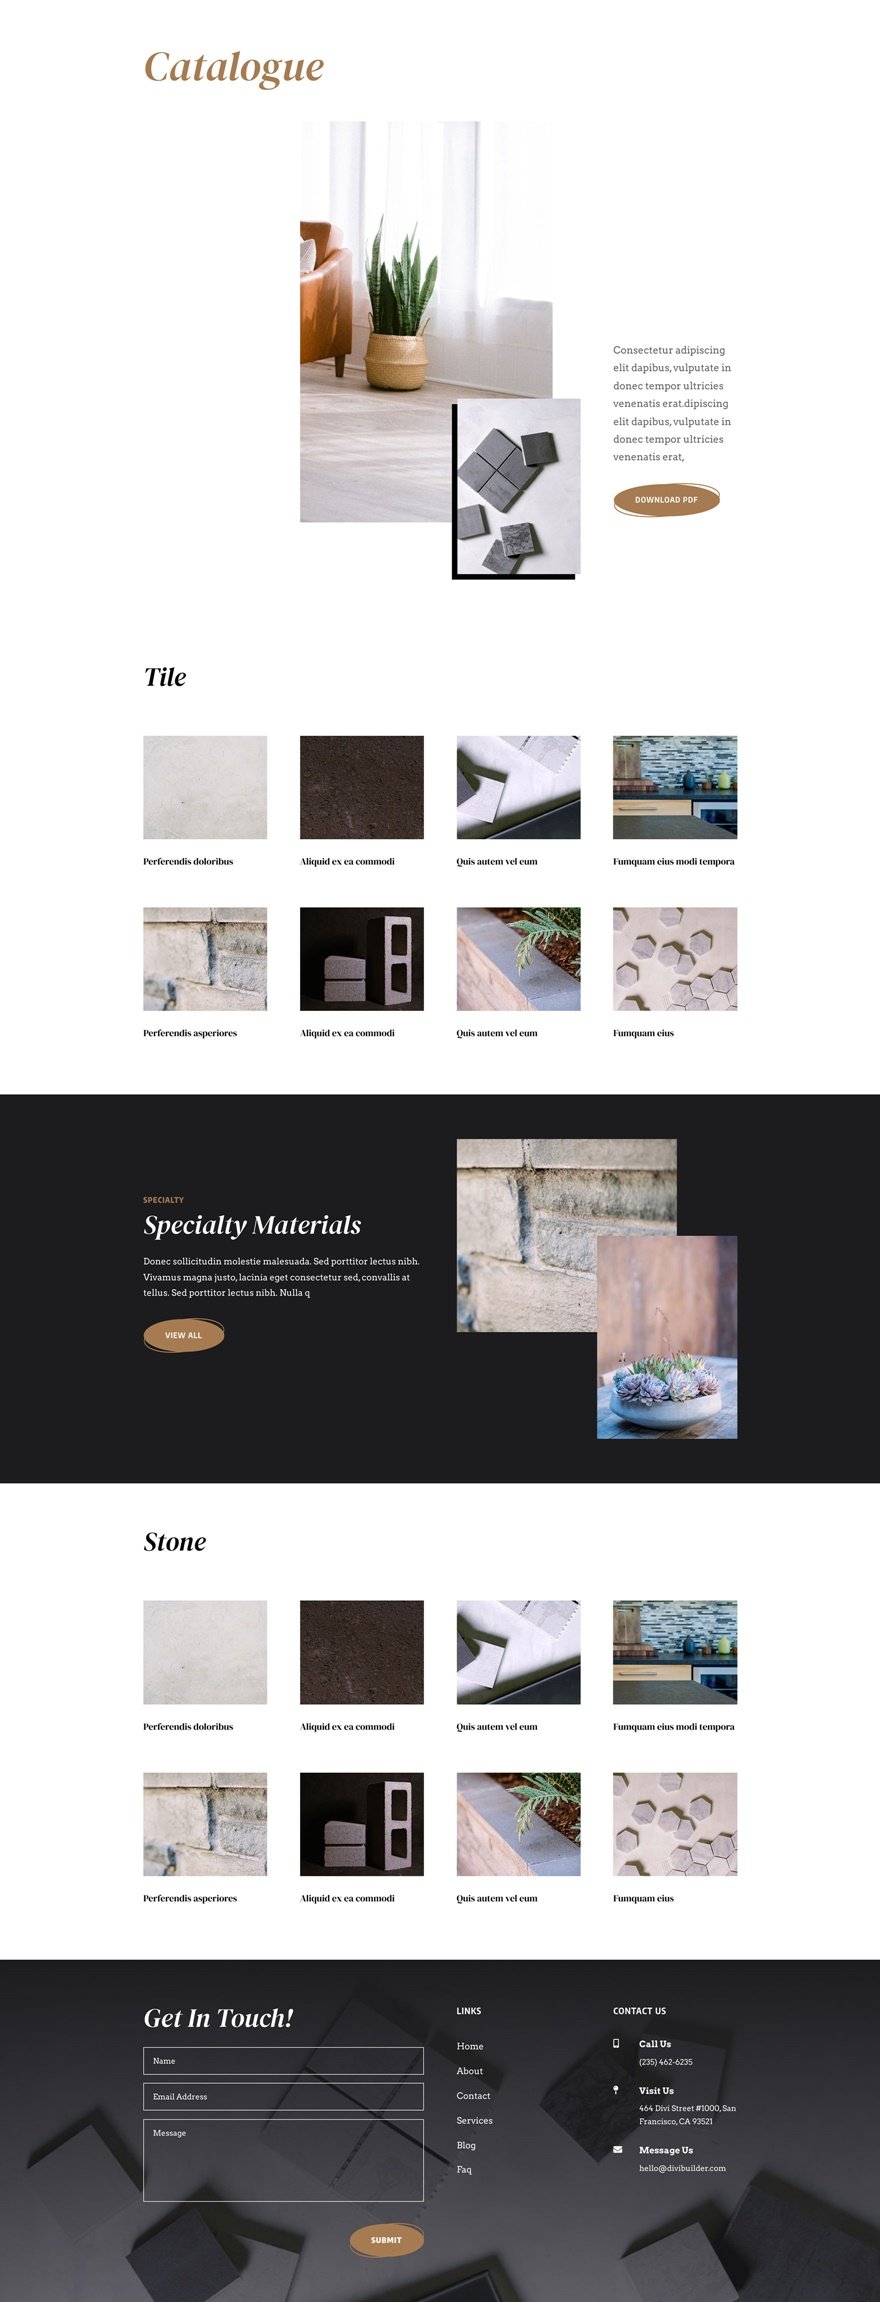 get-a-a-free-stone-factory-layout-pack-for-divi-7 获得 Divi 的免费 Stone Factory Layout Pack